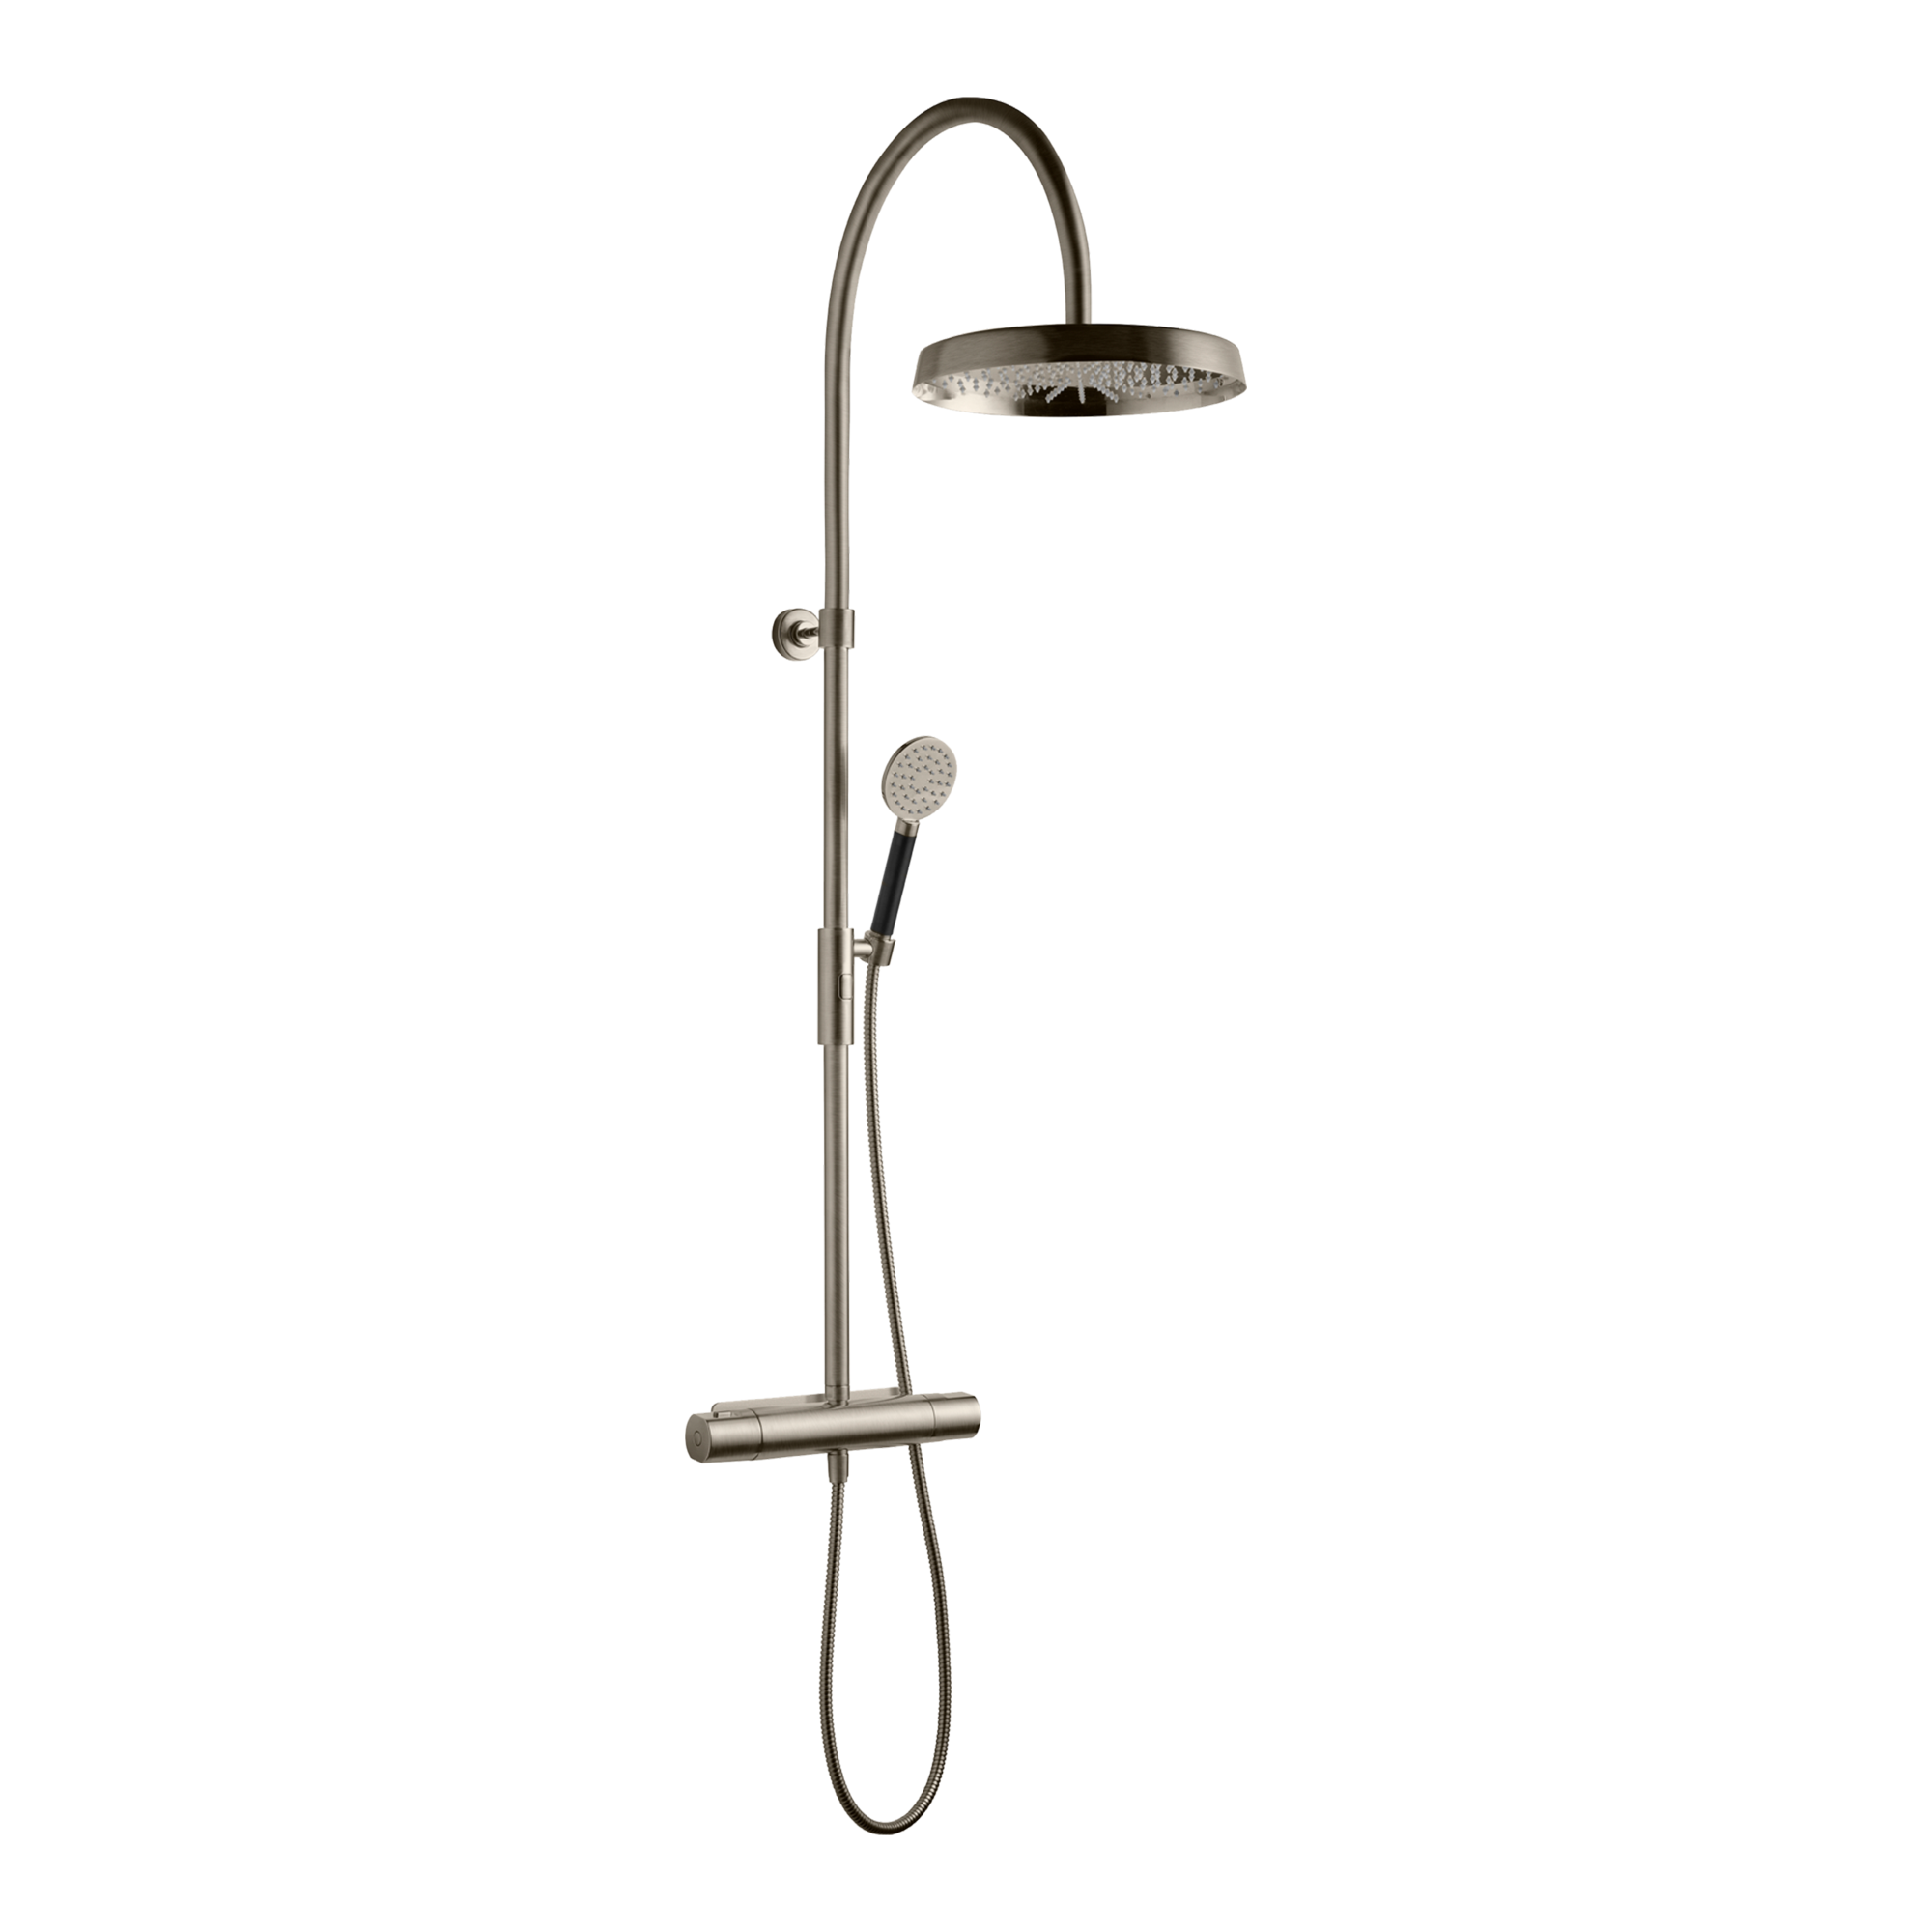 Tapwell Takdusch ARM7300-160 Brushed Nickel